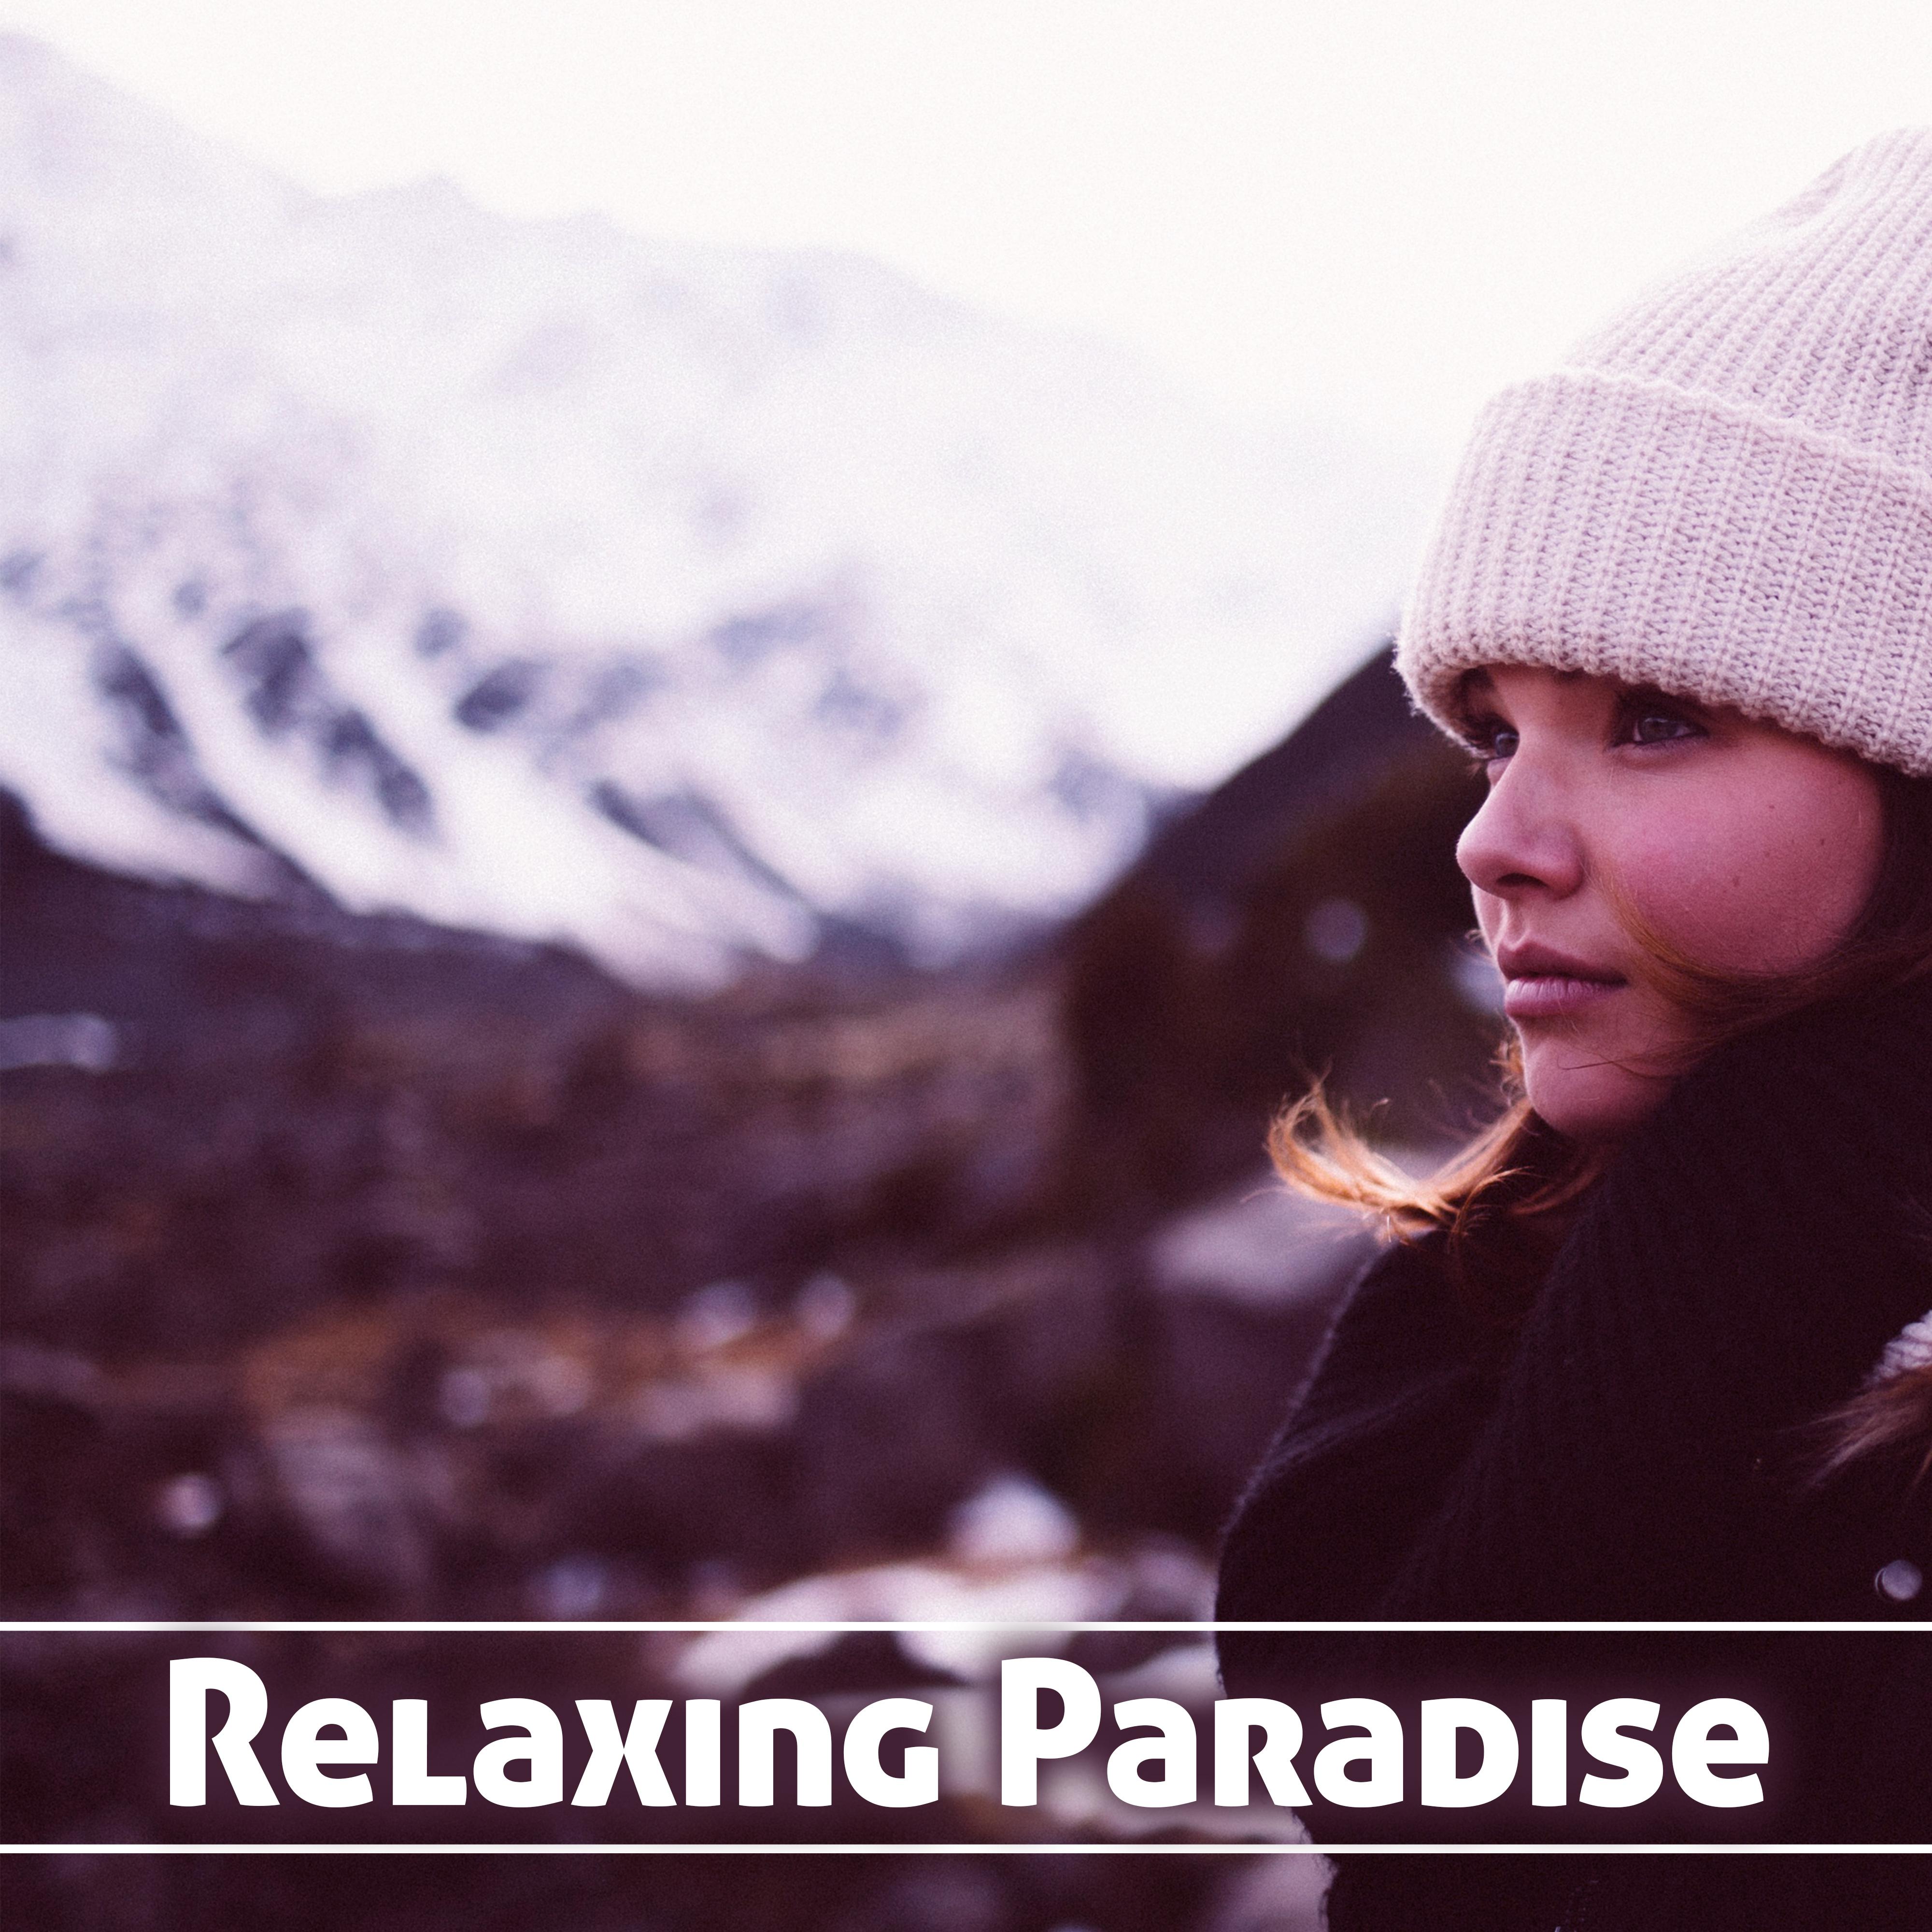 Relaxing Paradise – Music for Spa, Massage Parlour, Music For Massage Treatments, Spa, Wellness, Relax